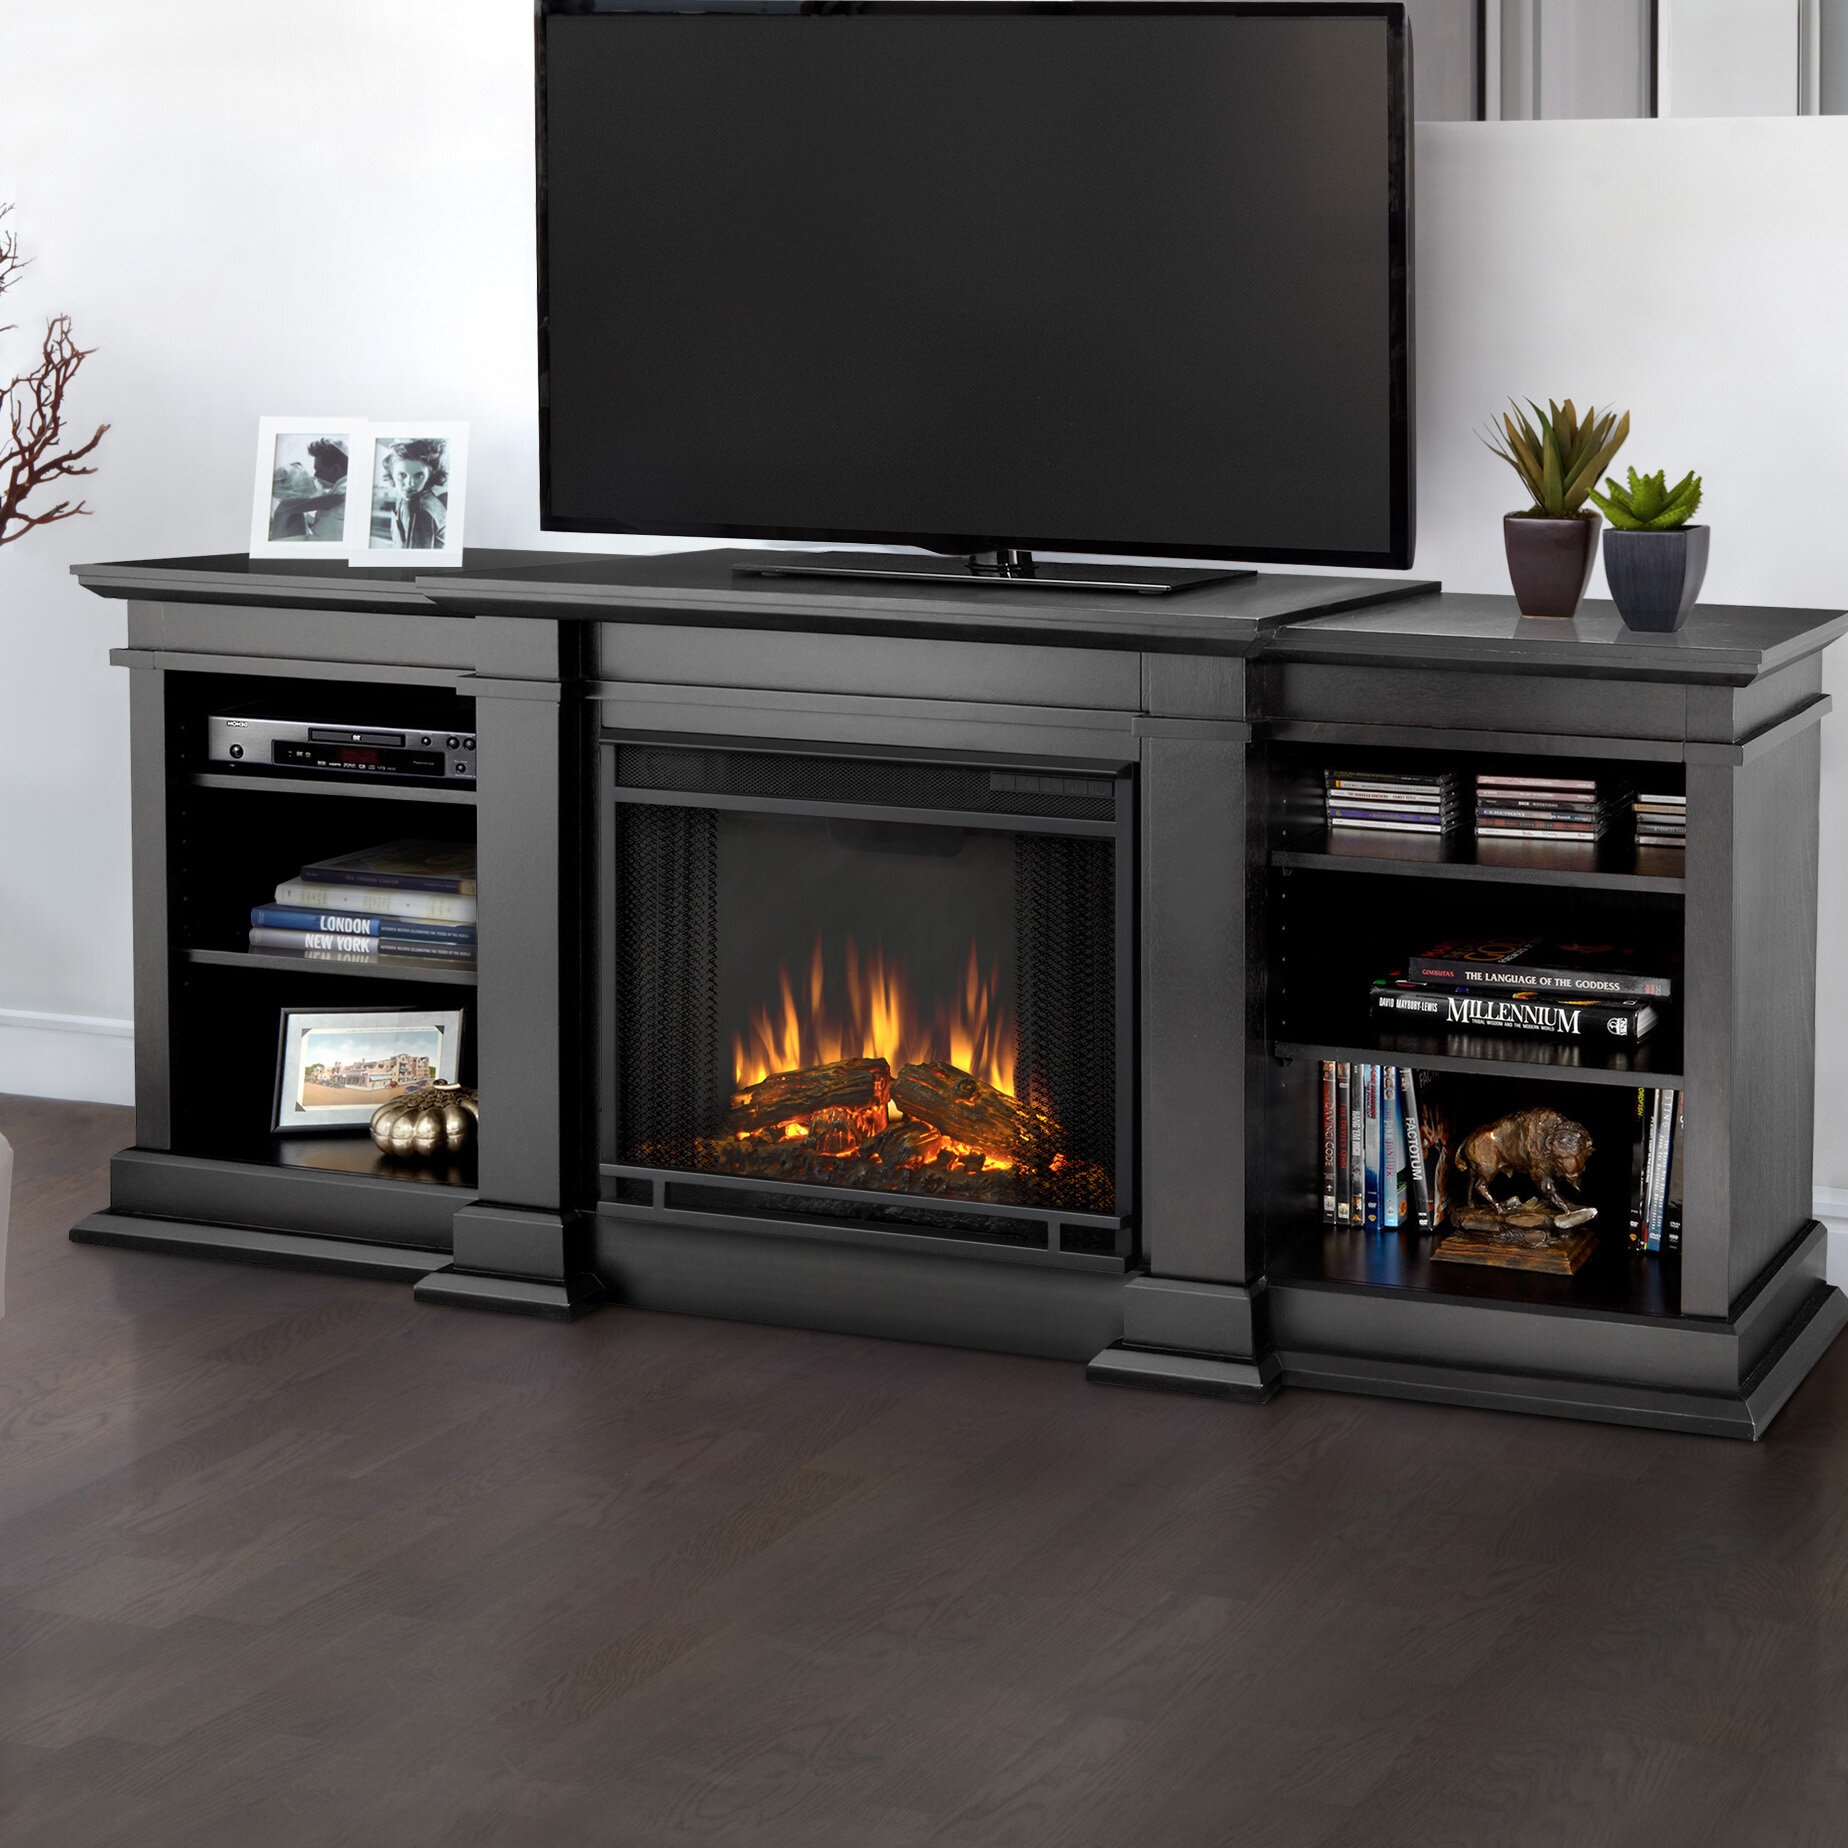 Fireplace Tv Stand 75 Inch Elegant Fresno Entertainment Center for Tvs Up to 70" with Electric Fireplace